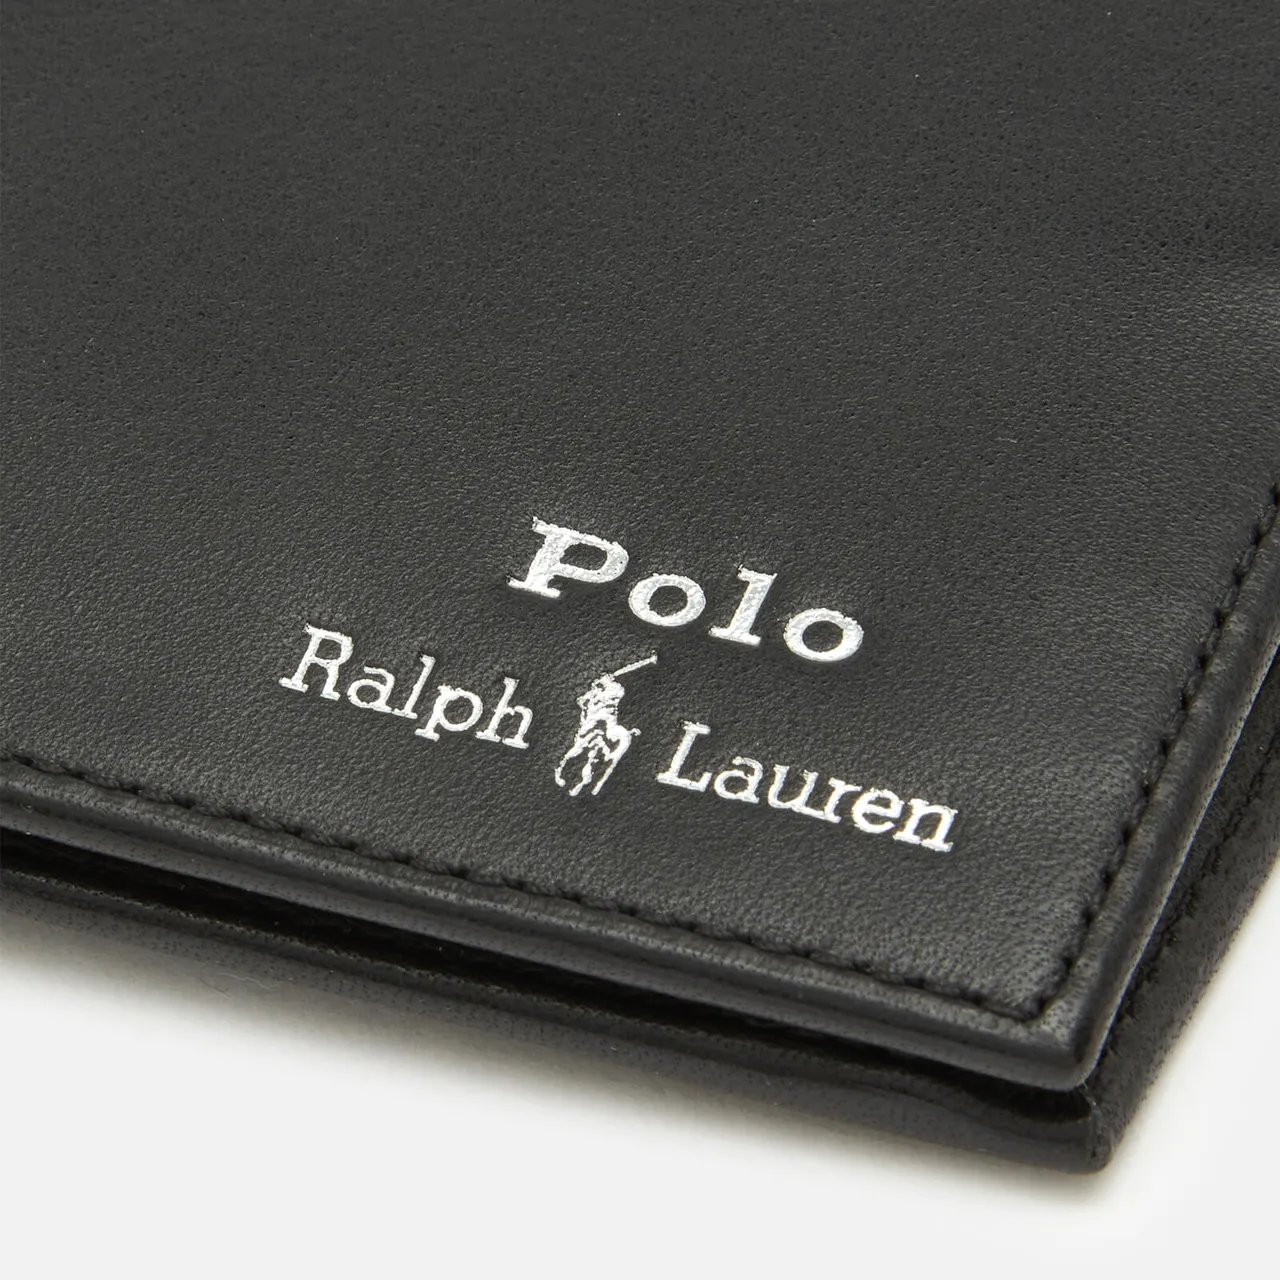 Polo Ralph Lauren Men's Smooth Leather Bifold Coin Wallet - Black